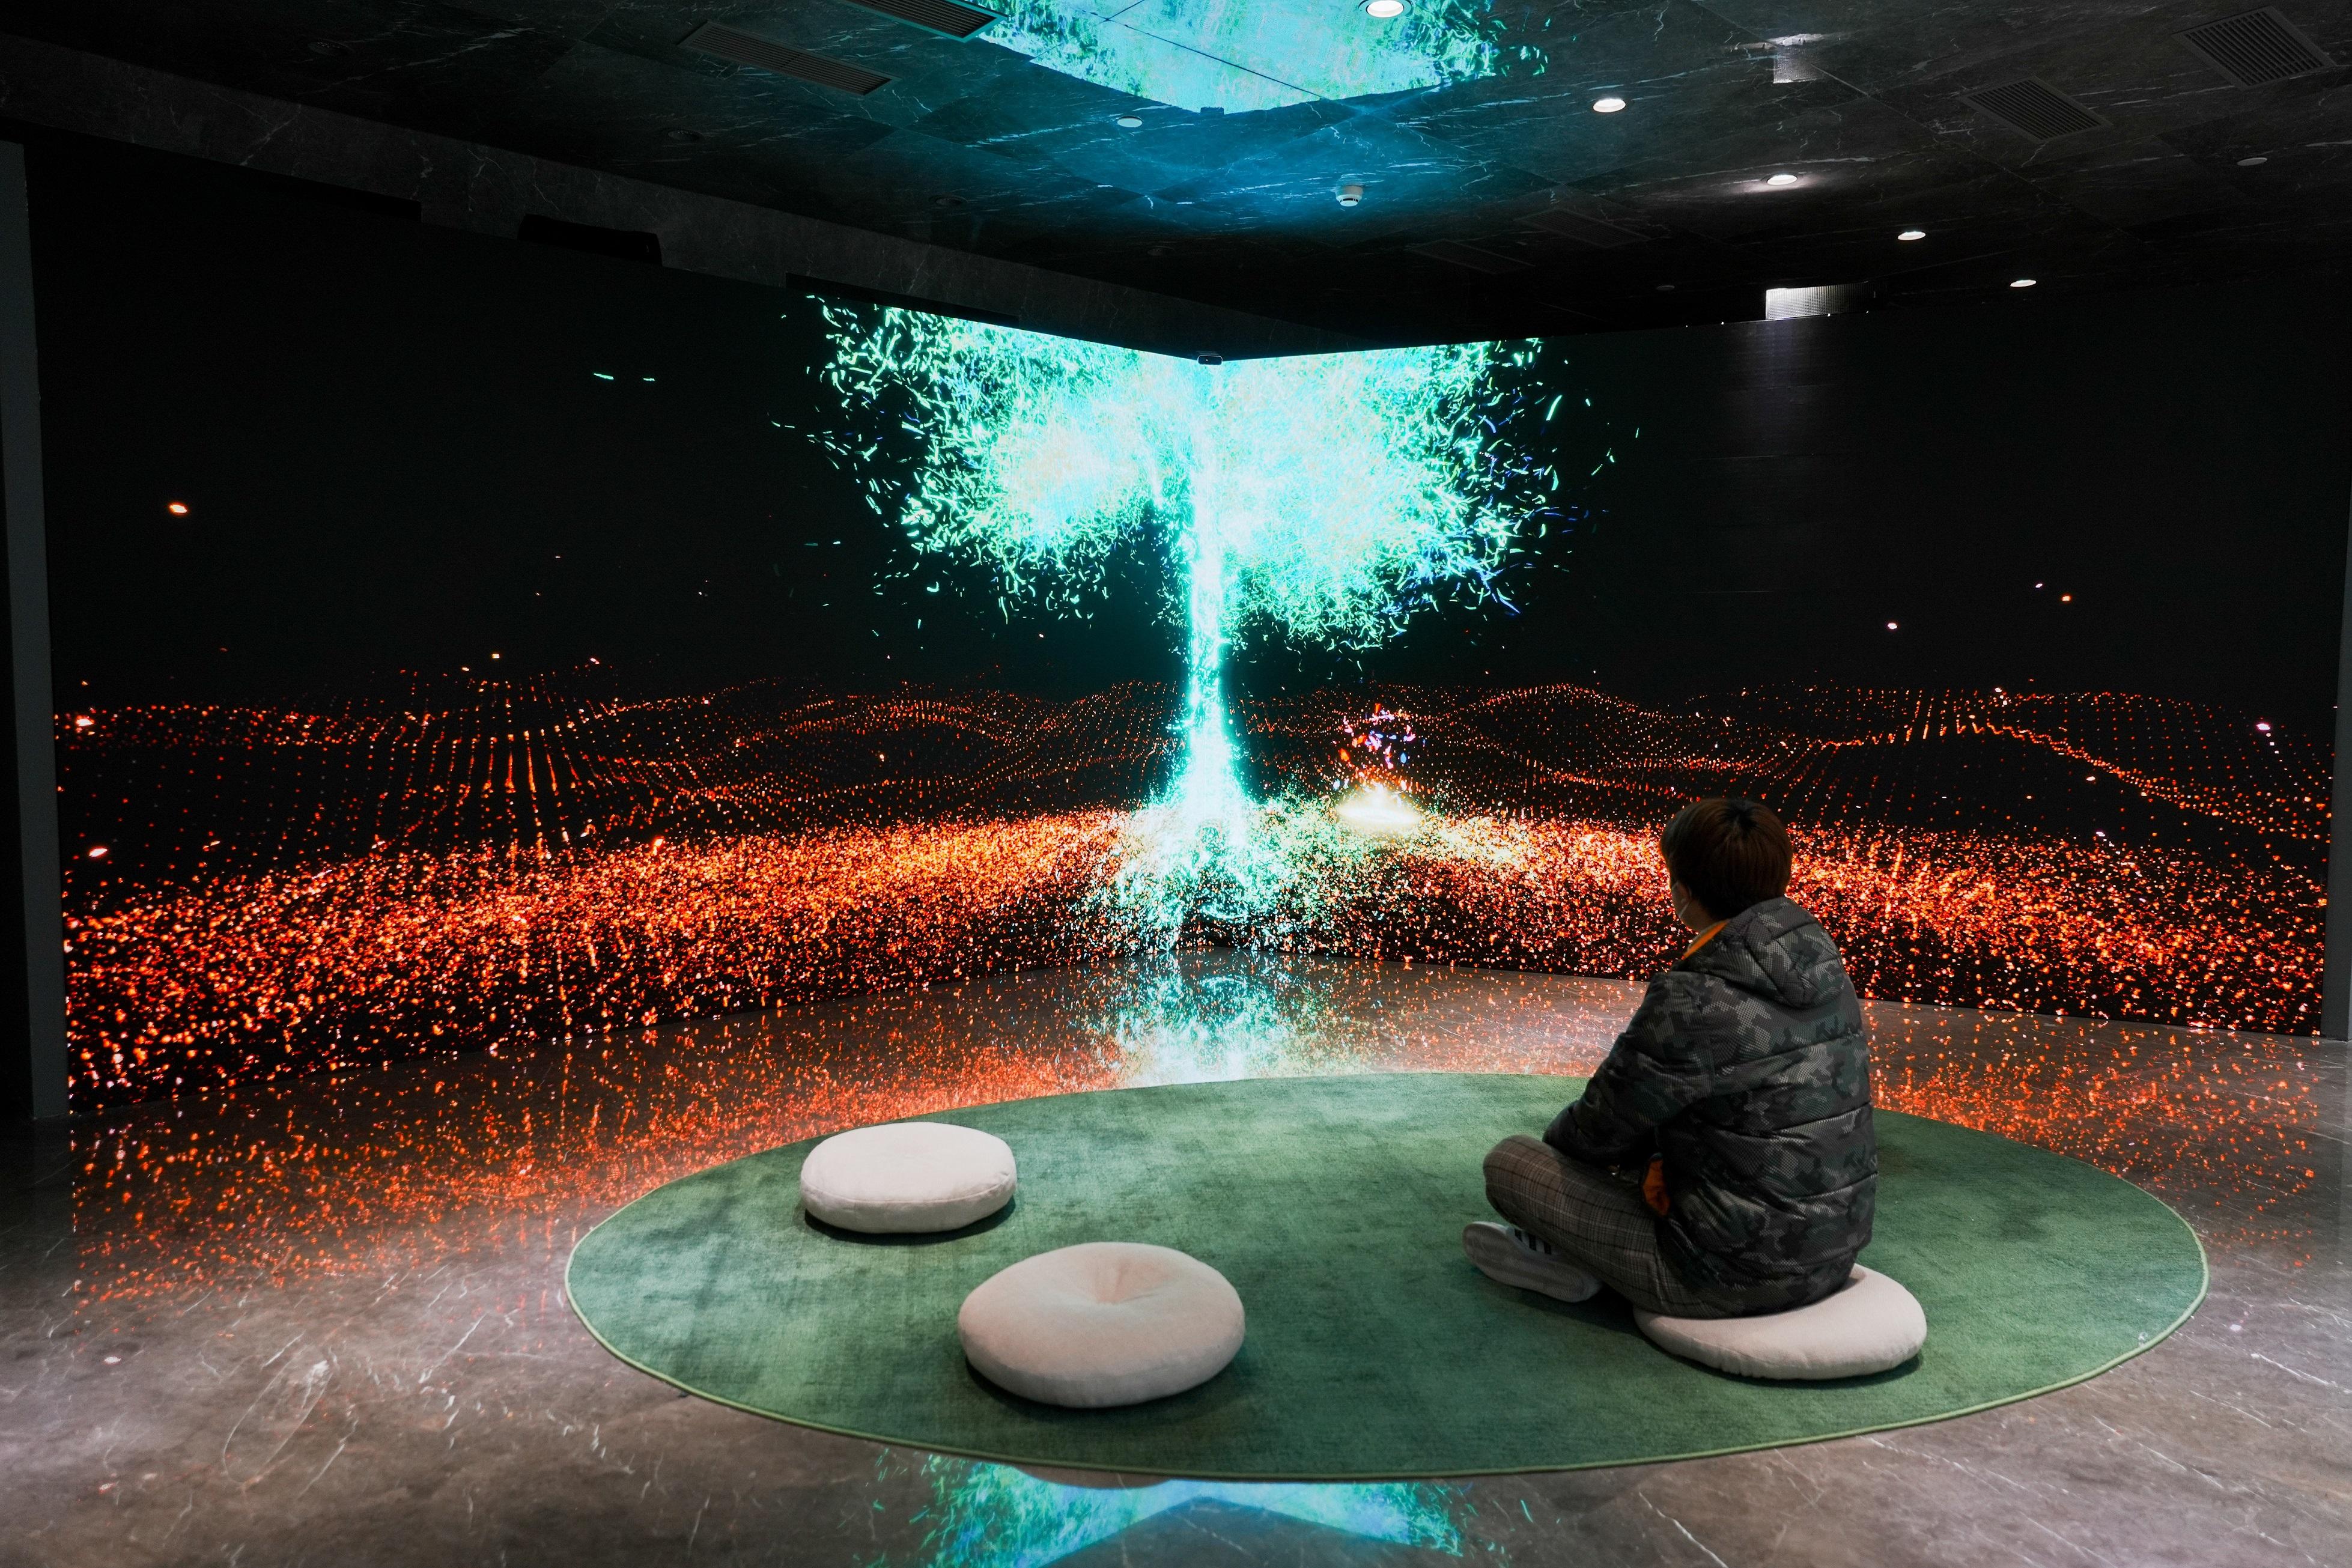 The "2022 Hong Kong-Macao Visual Art Biennale" is being held at the Beijing Quanyechang Cultural Arts Centre. Photo shows an interactive immersive experience installation, "Tree of heaven", created by Hong Kong artist duo, Samuel Yip and Janice To, which simulates a virtual jungle in a fictional future. This work presents a peaceful coexistence among different species in nature. It is made possible by the audience's interaction with the work, as the audience's behaviours affect the life cycles of the various plant species.